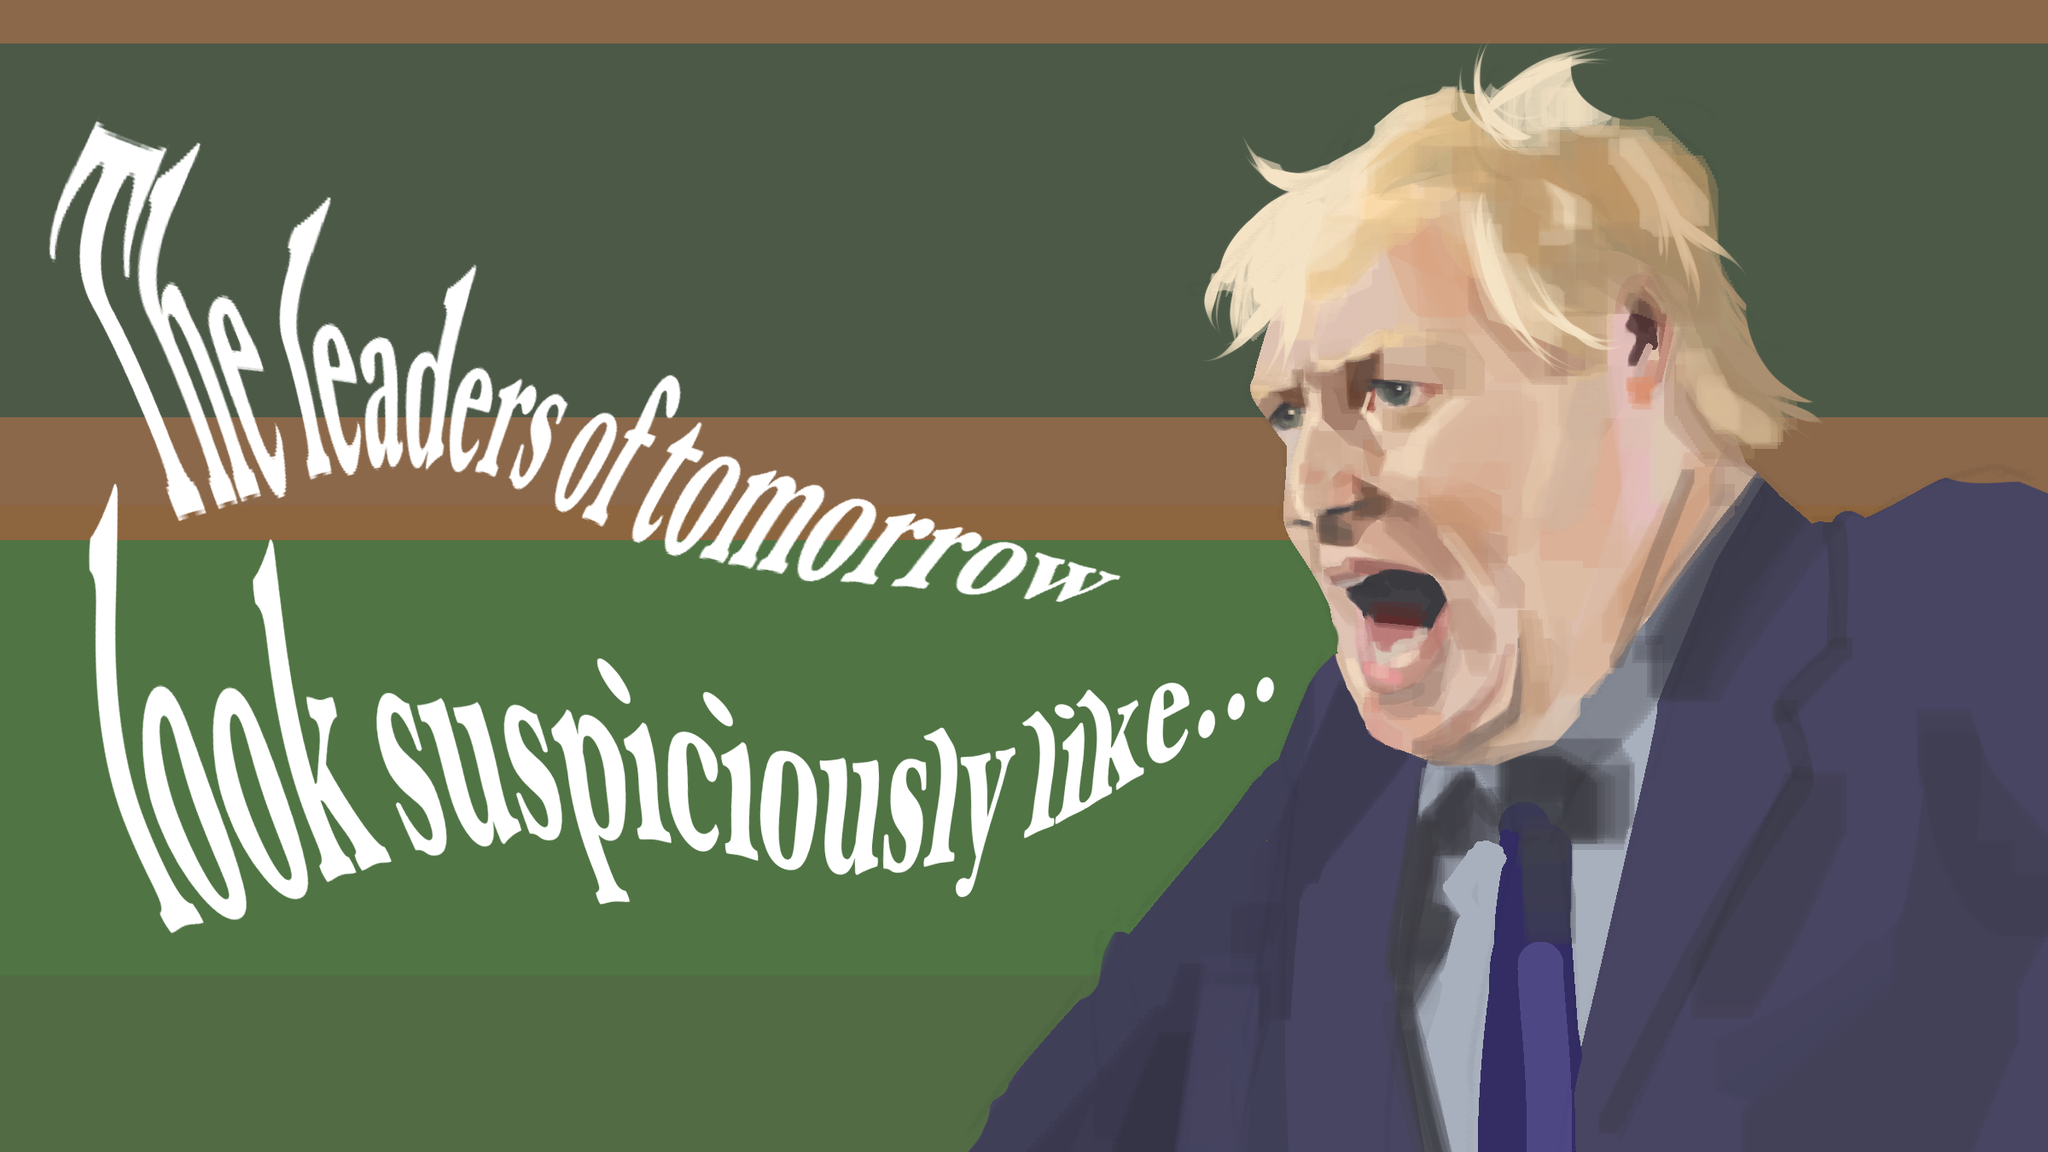 Art of Boris Johnson in the House of Commons with words coming out of his mouth which read 'The leaders of tomorrow look suspiciously like ...'